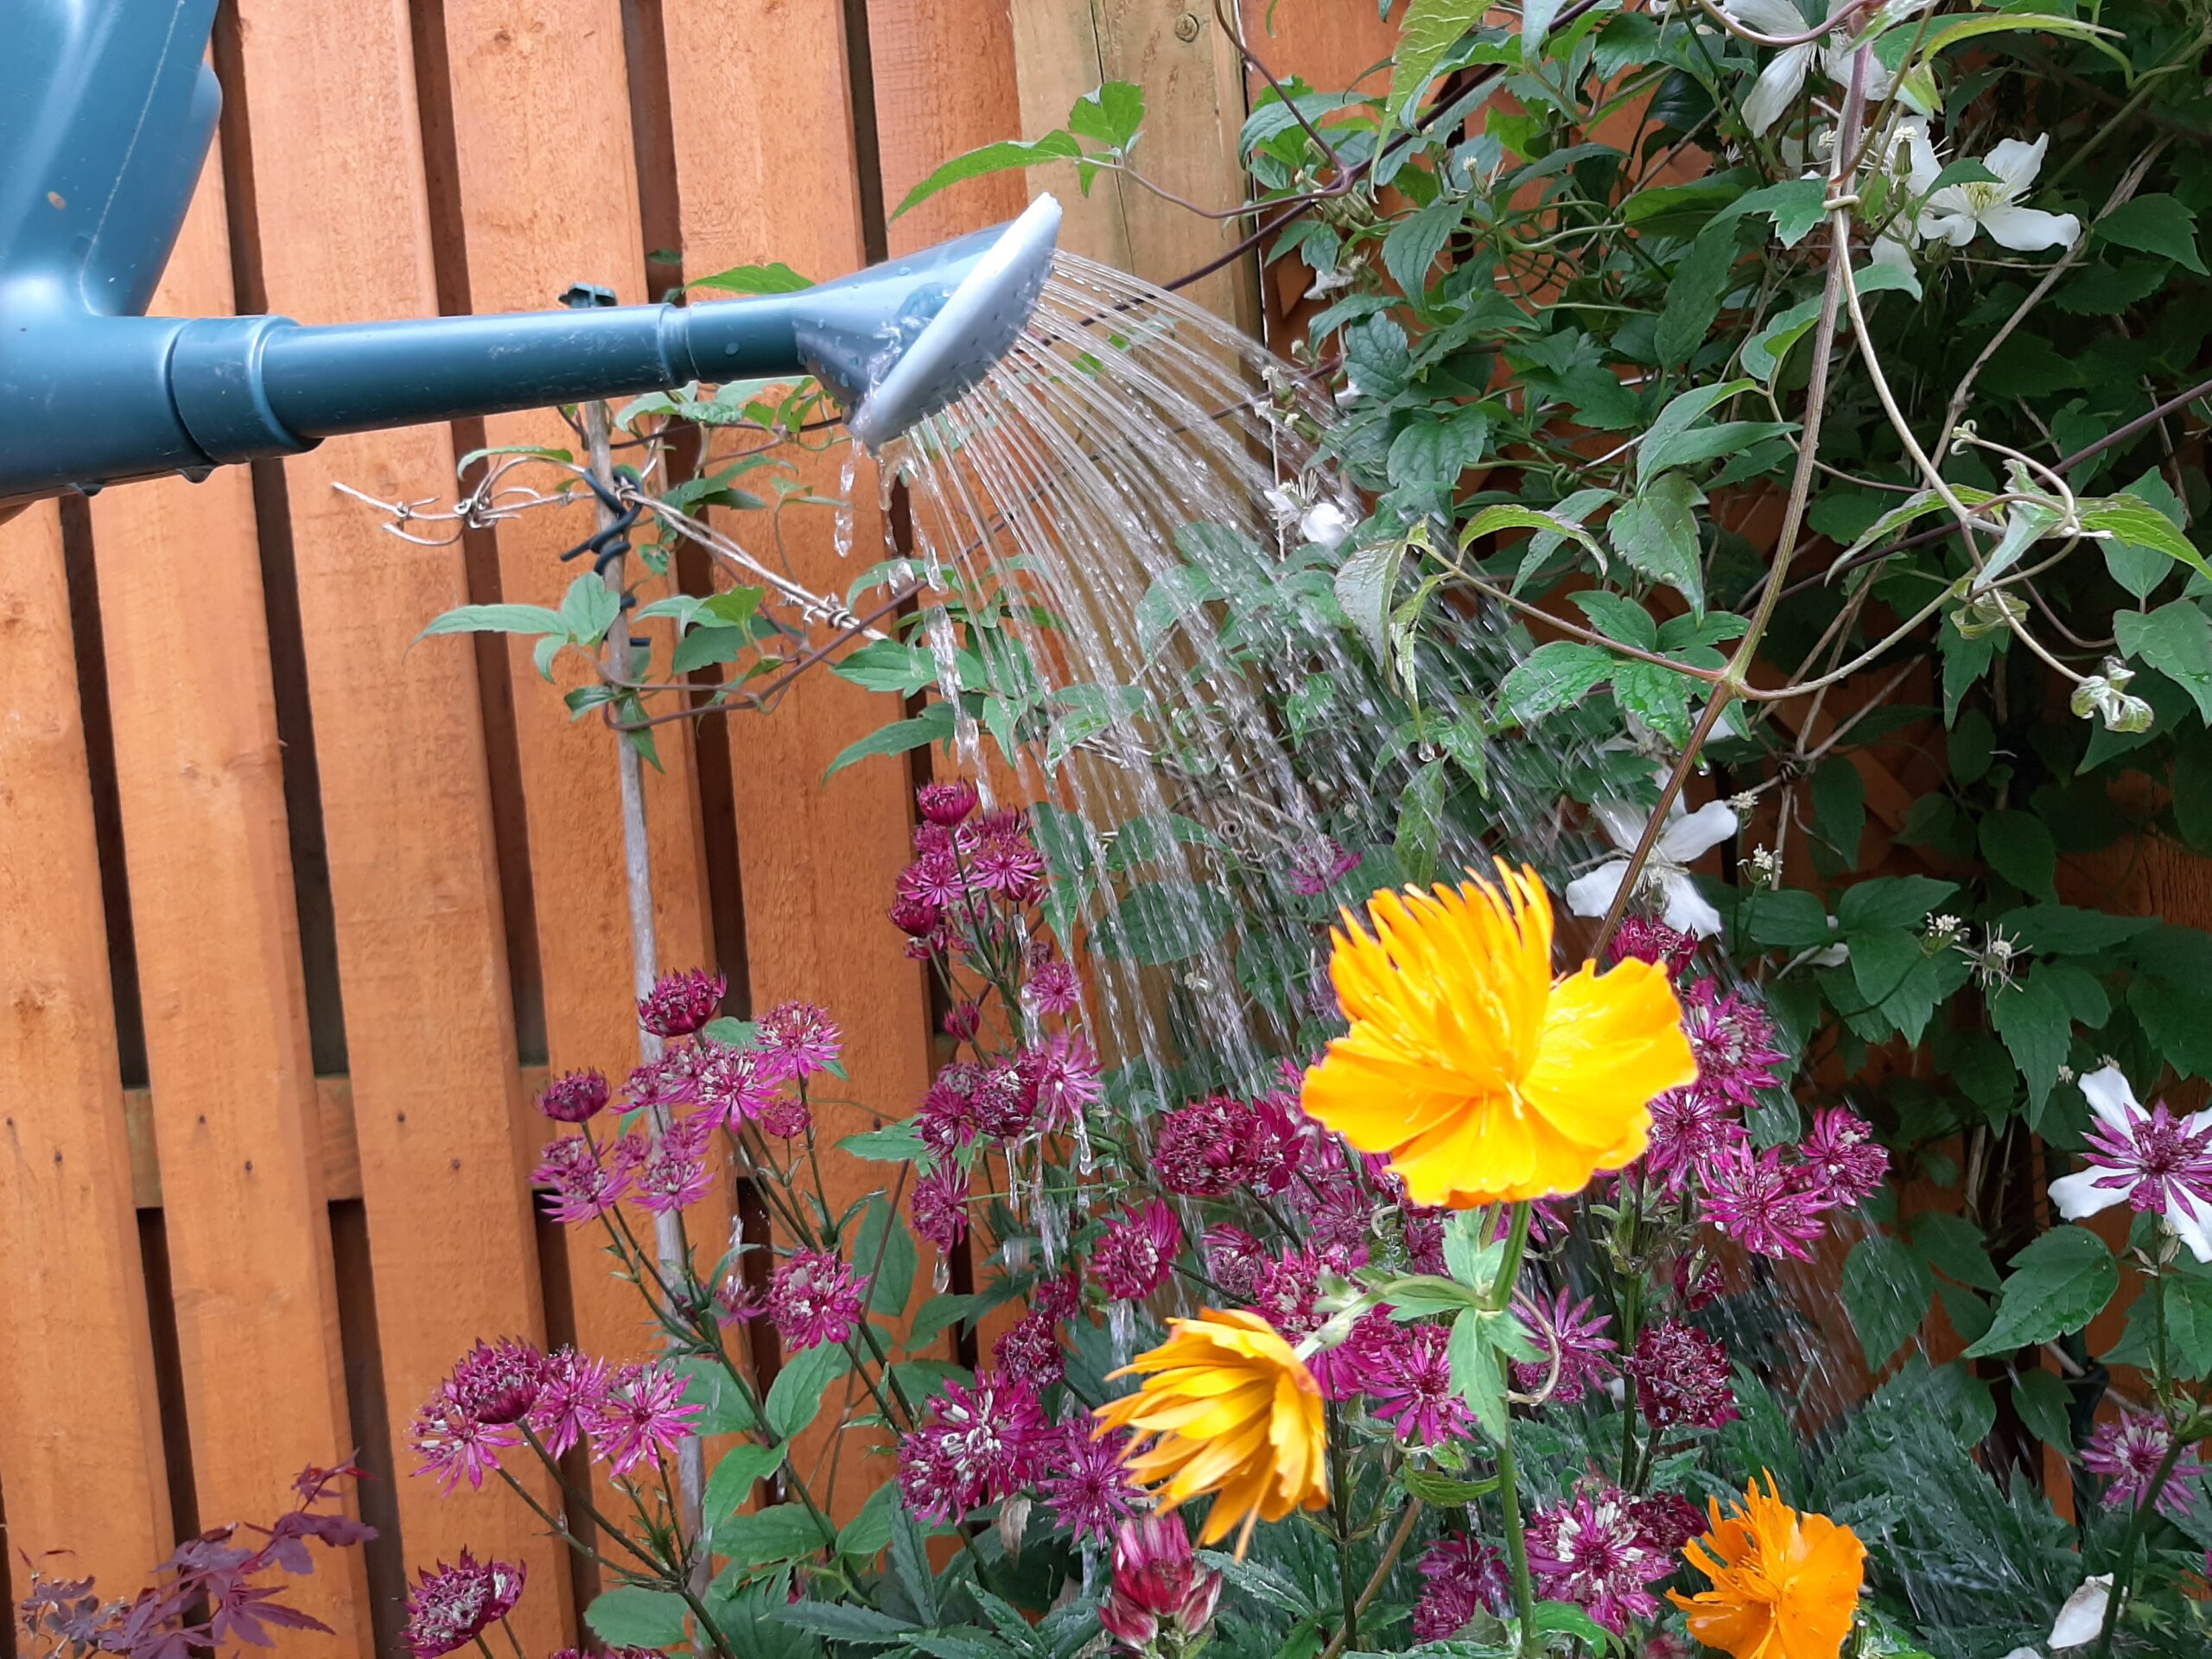 watering can with water coming from spout onto flowers